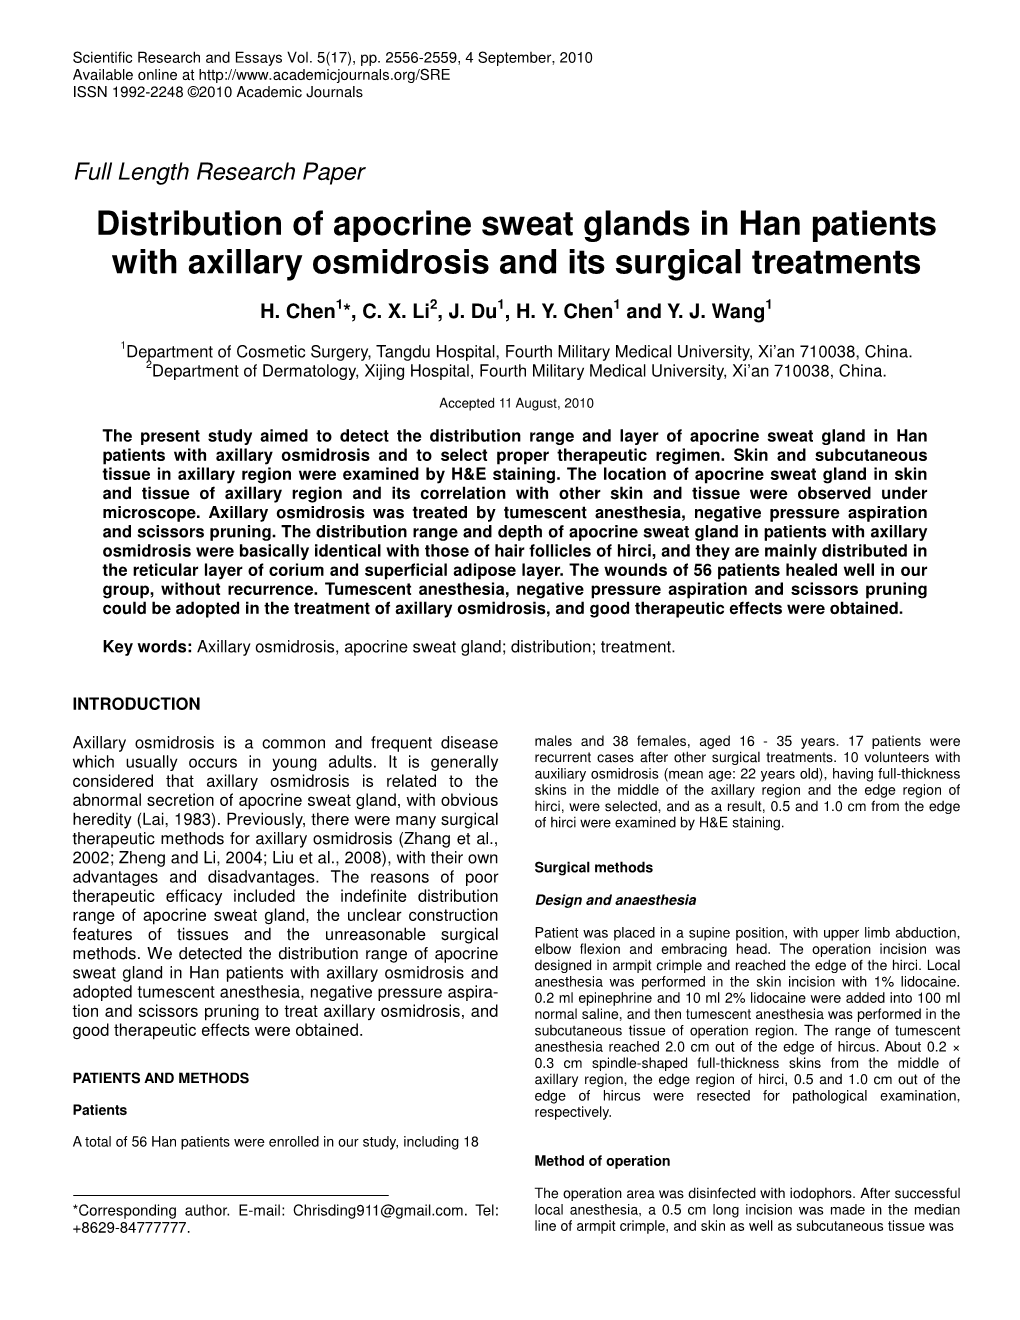 Distribution of Apocrine Sweat Glands in Han Patients with Axillary Osmidrosis and Its Surgical Treatments